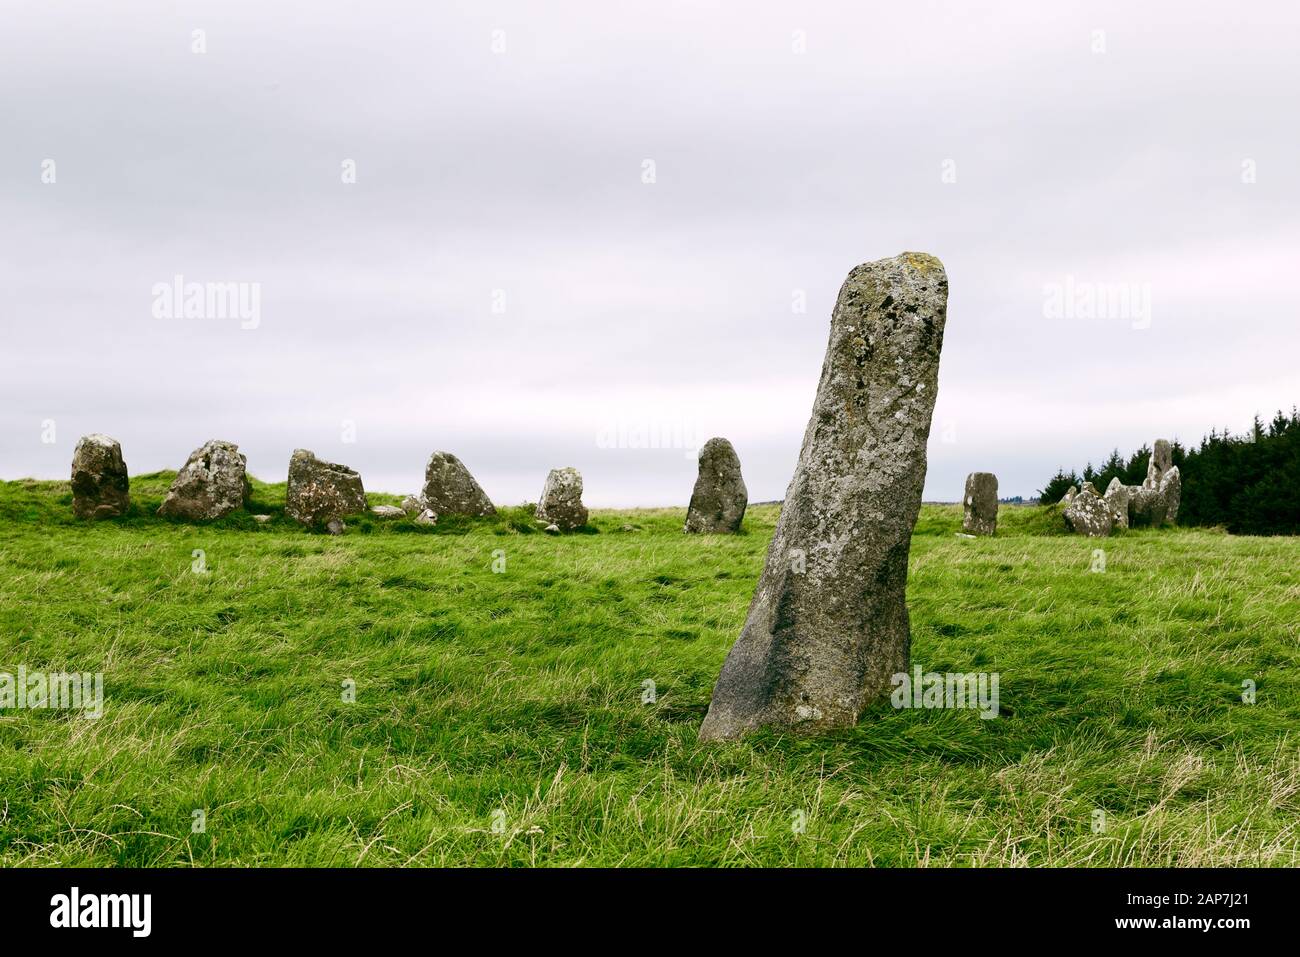 Beltany prehistoric stone circle. Raphoe, Donegal, Ireland. Neolithic and Bronze Age ritual site 2100-700 BC. Outlier with the S.E. quadrant behind Stock Photo